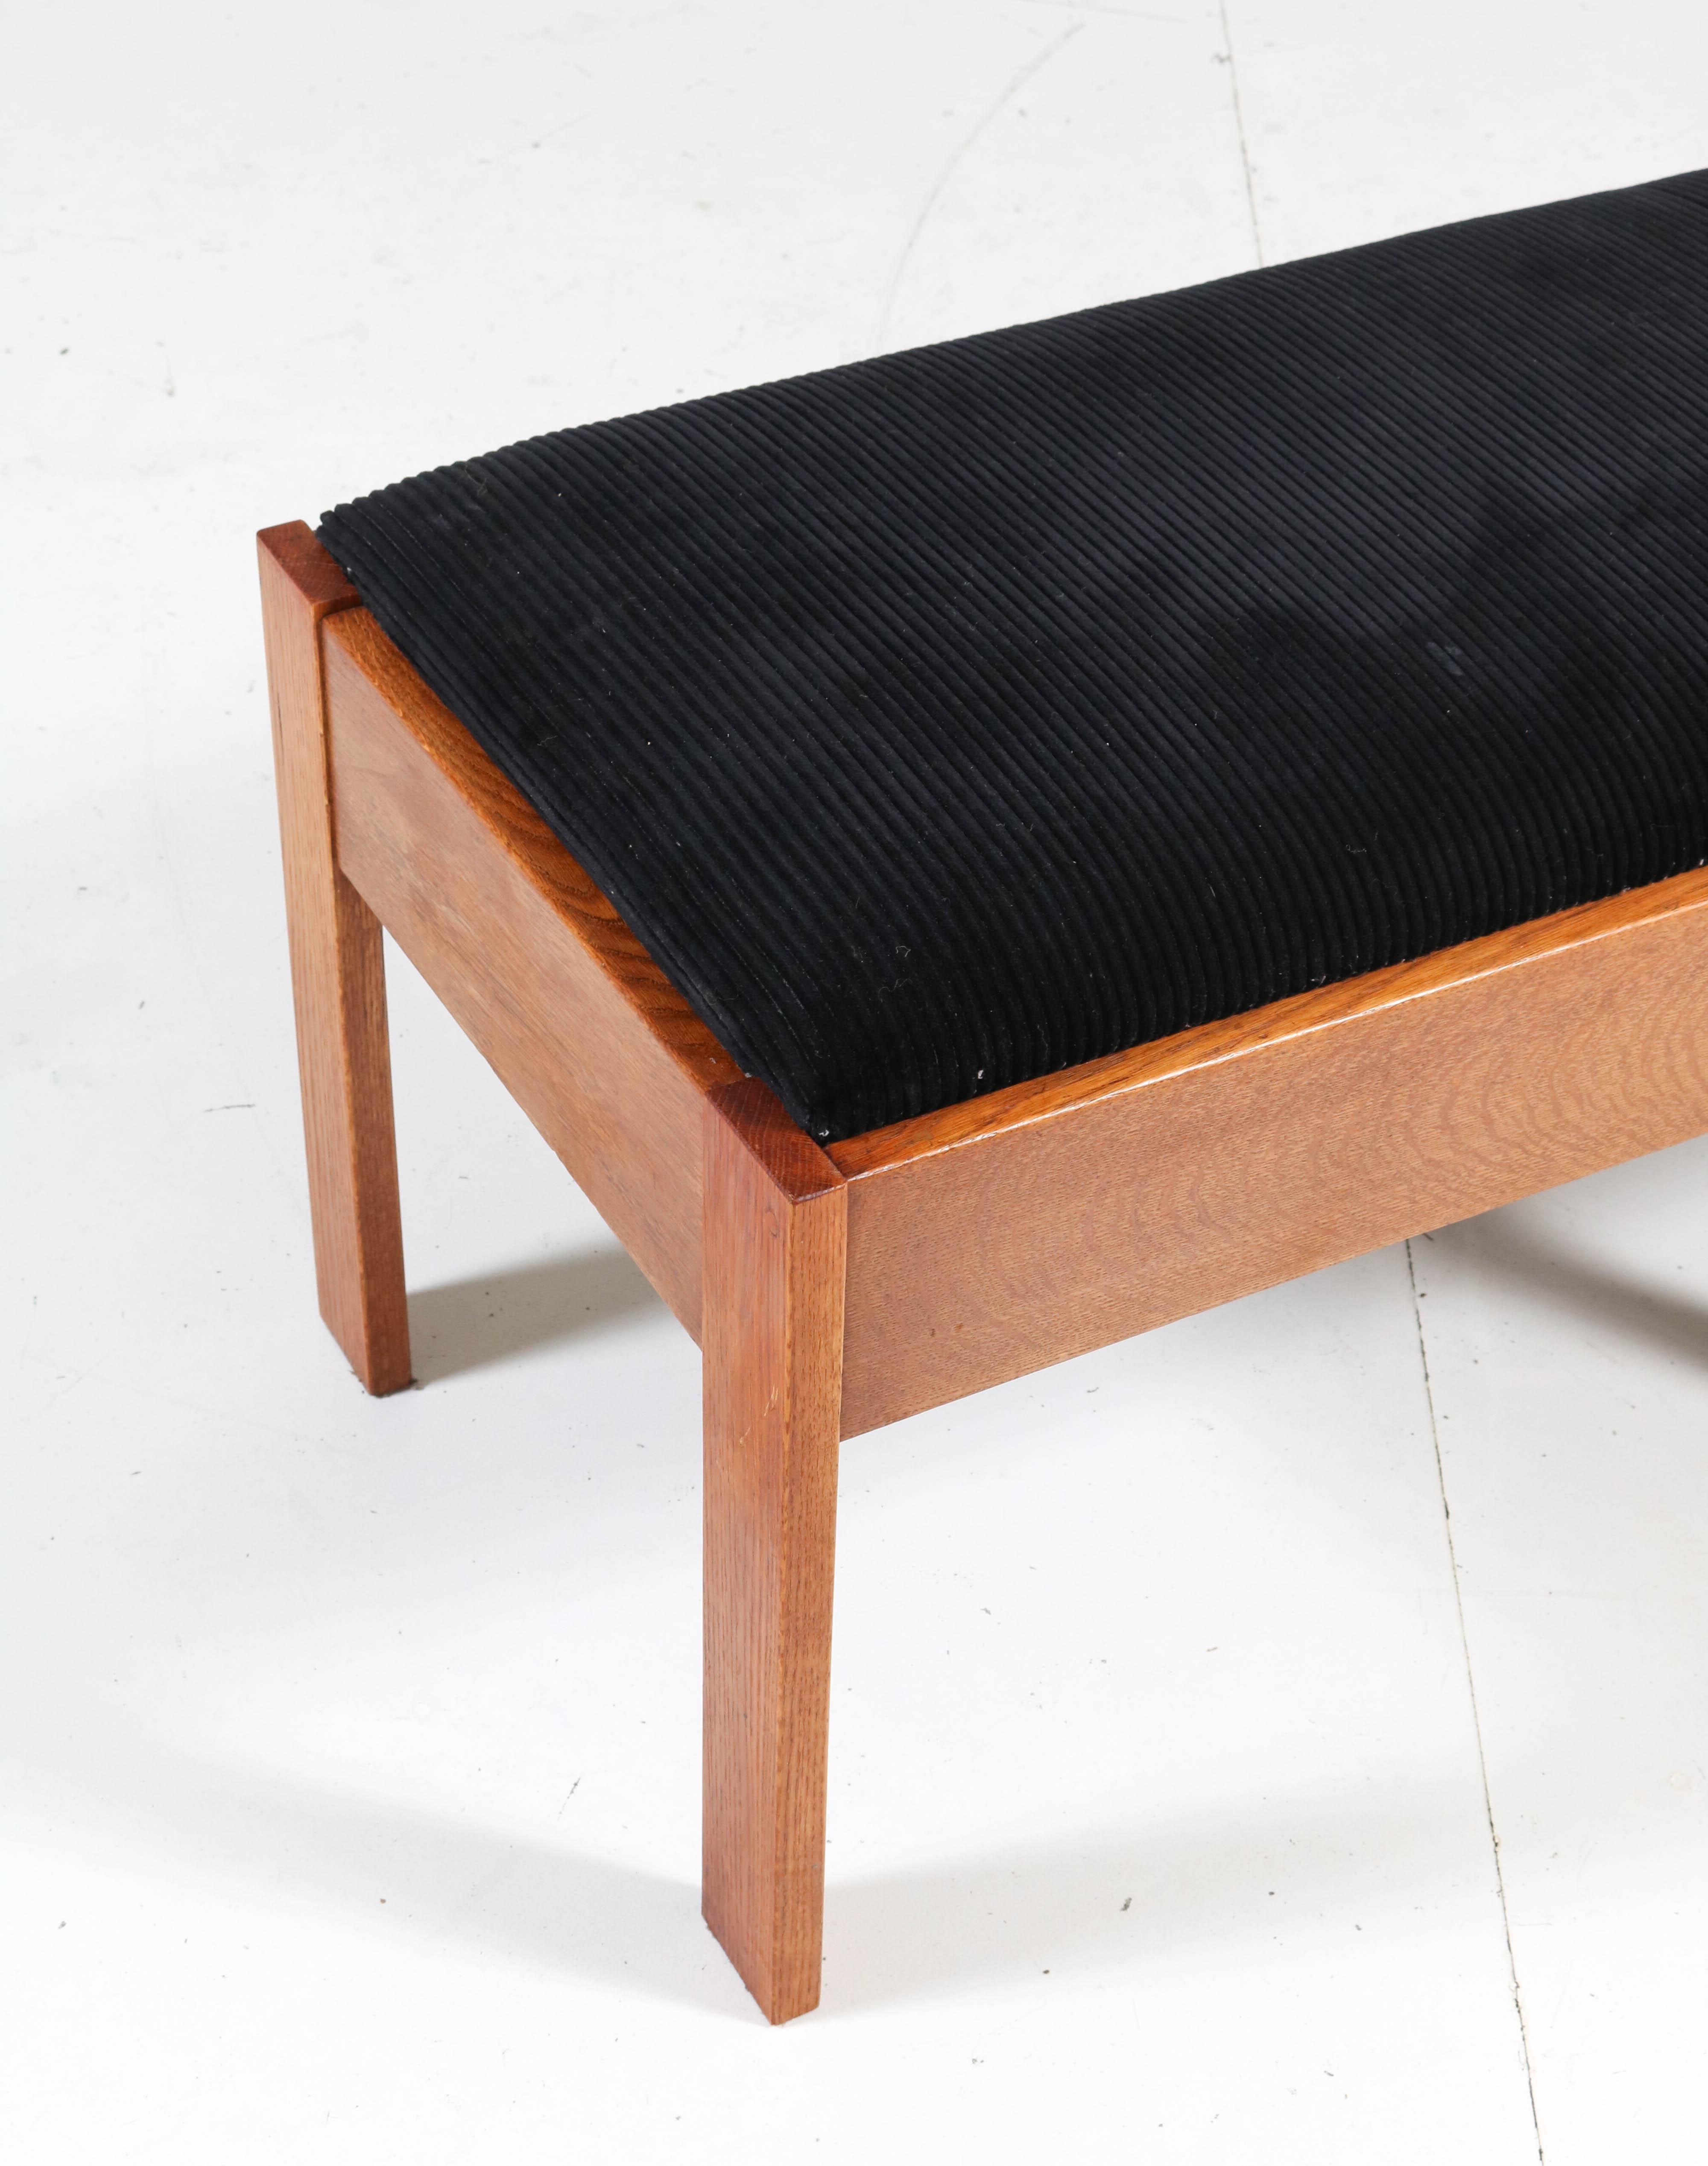 Fabric Oak Art Deco Haagse School Bench or Sofa by J.C. Jansen for L.O.V. Oosterbeek